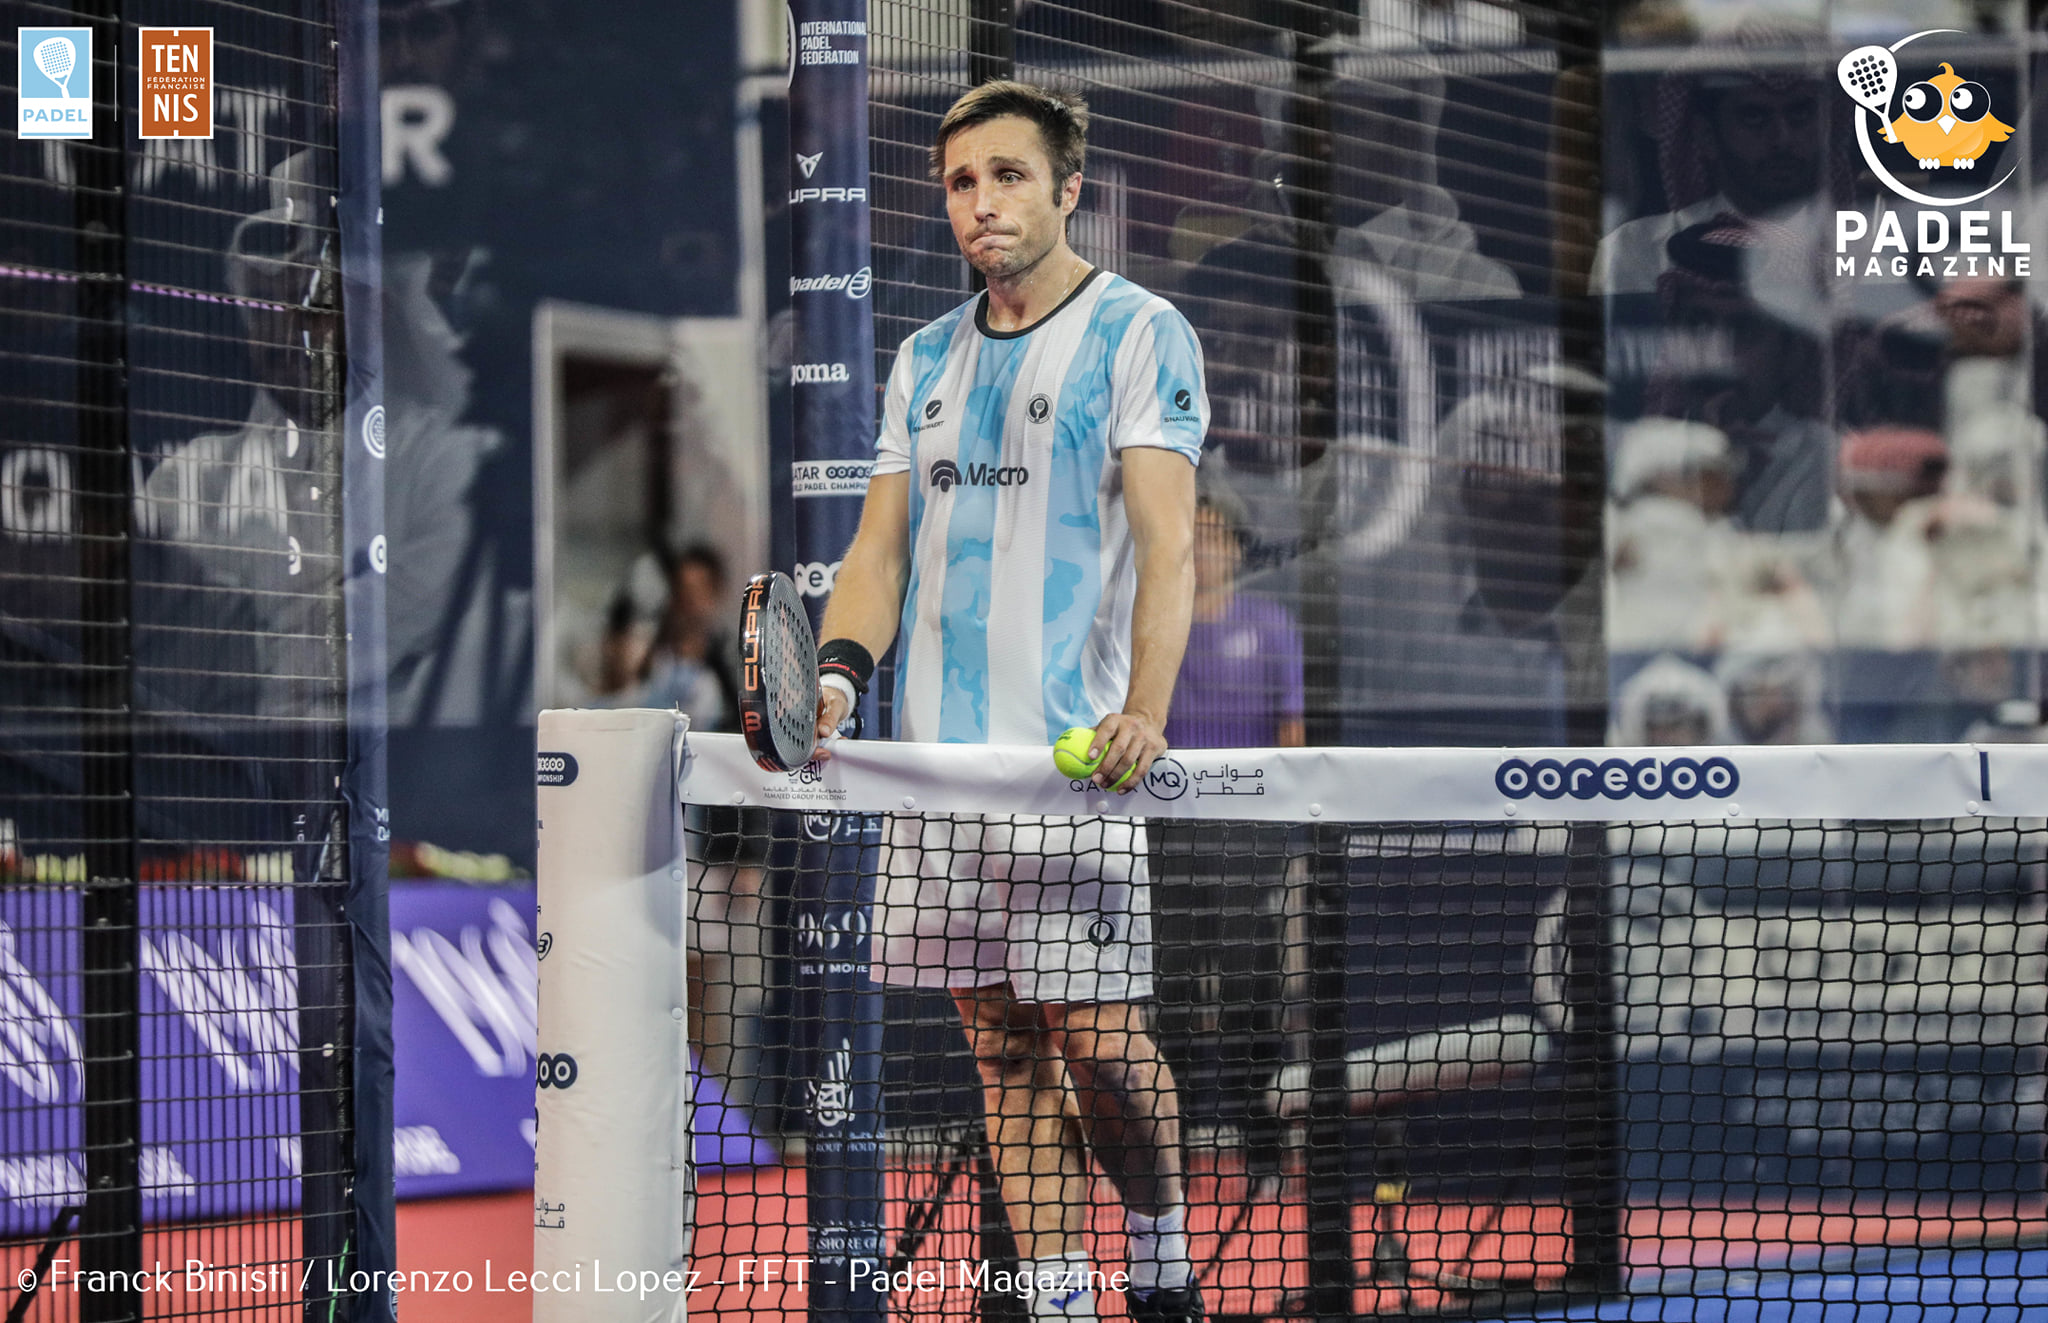 How much does a player earn padel in 2022?